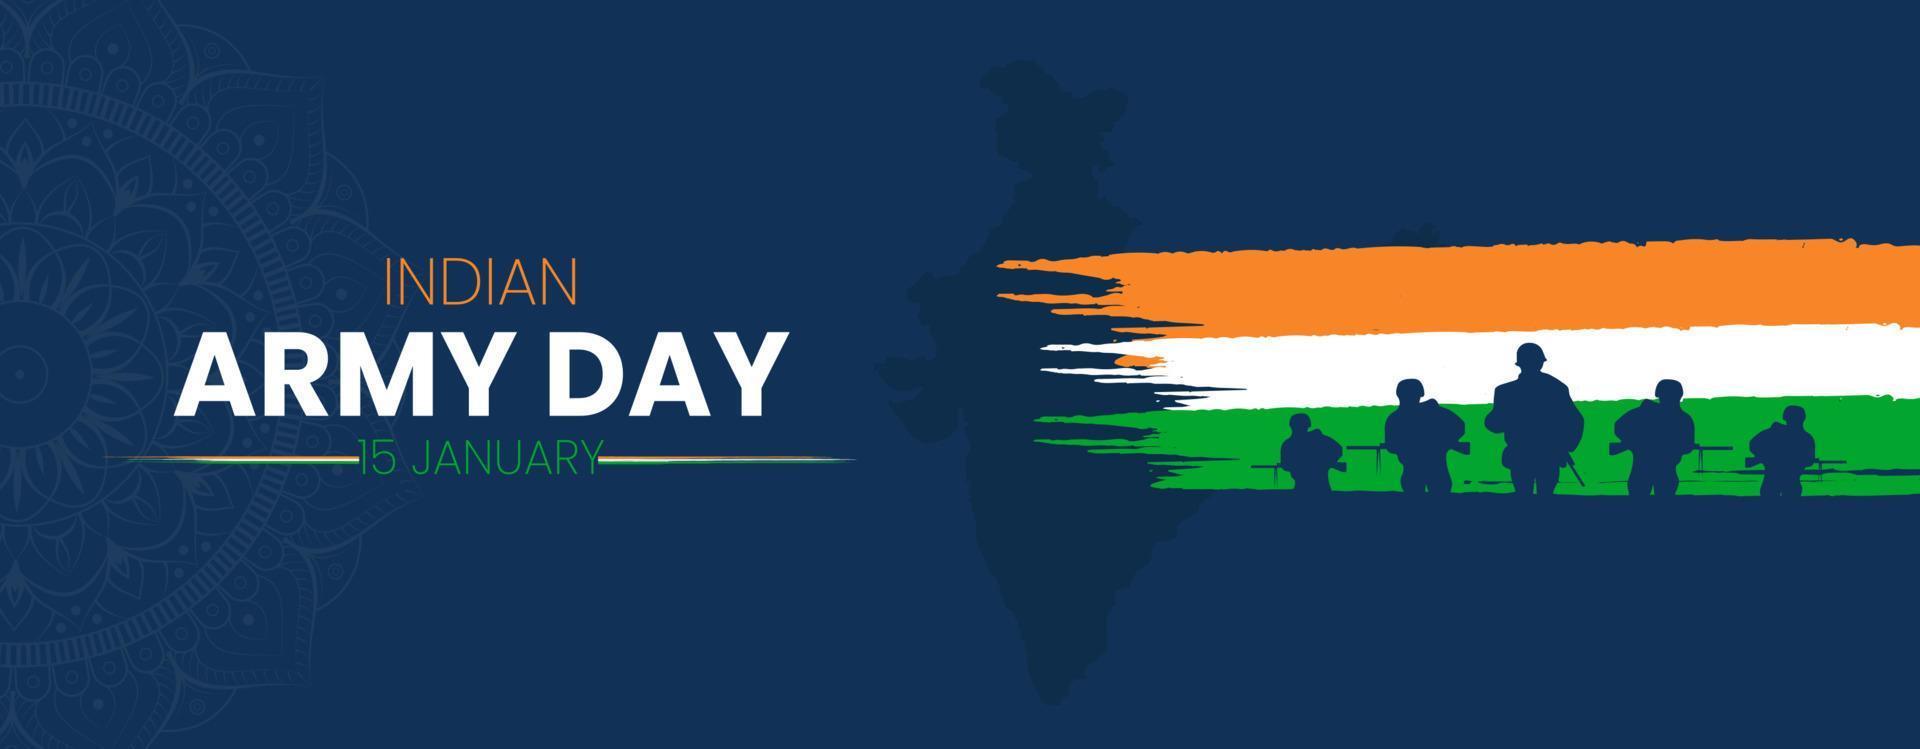 Indian army day web banner design vector